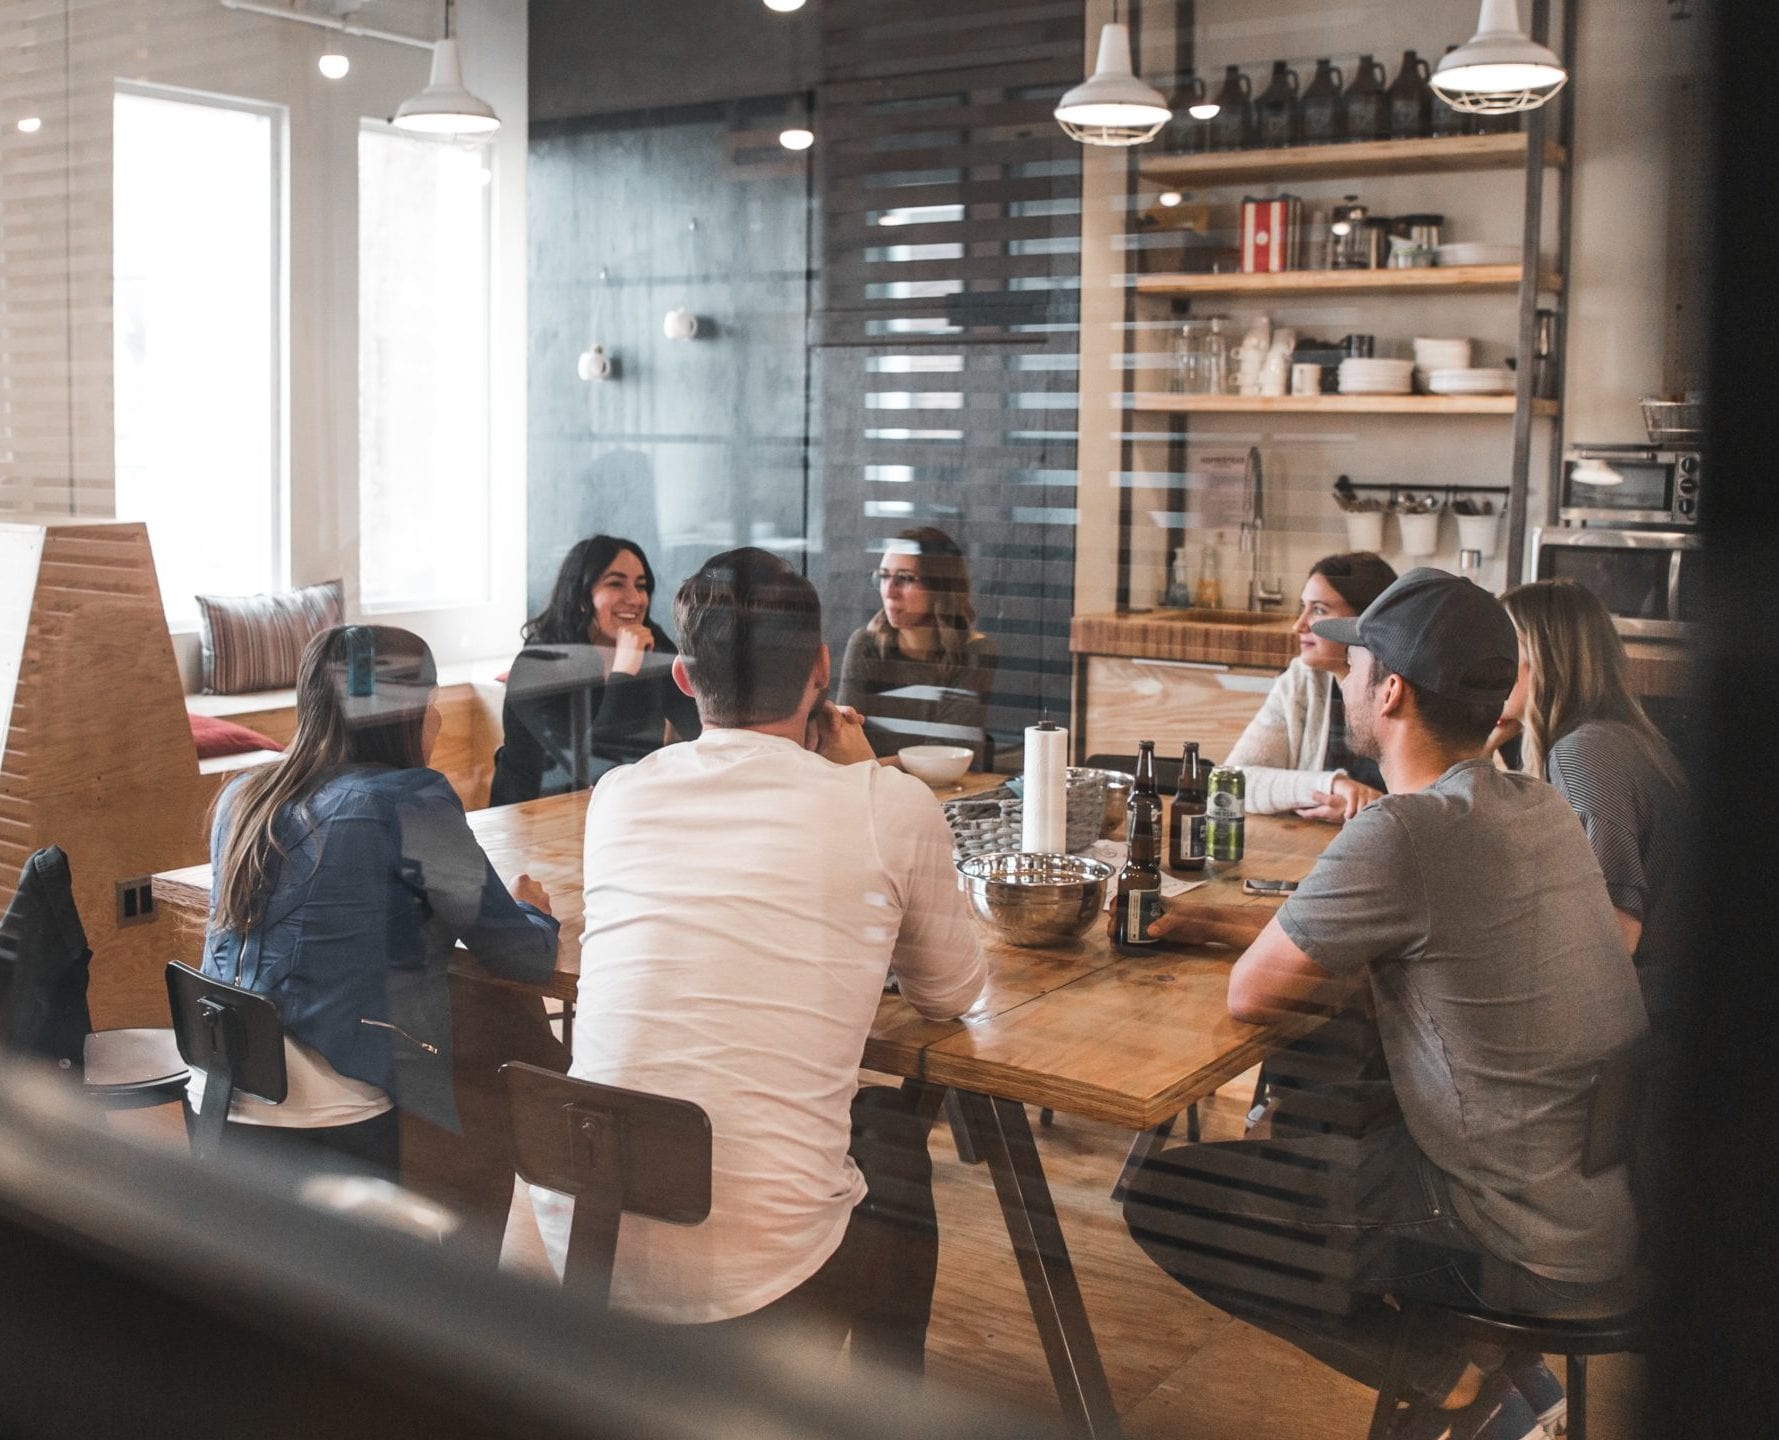 Photo: Group of people sitting around a table by bantersnaps on Unsplash